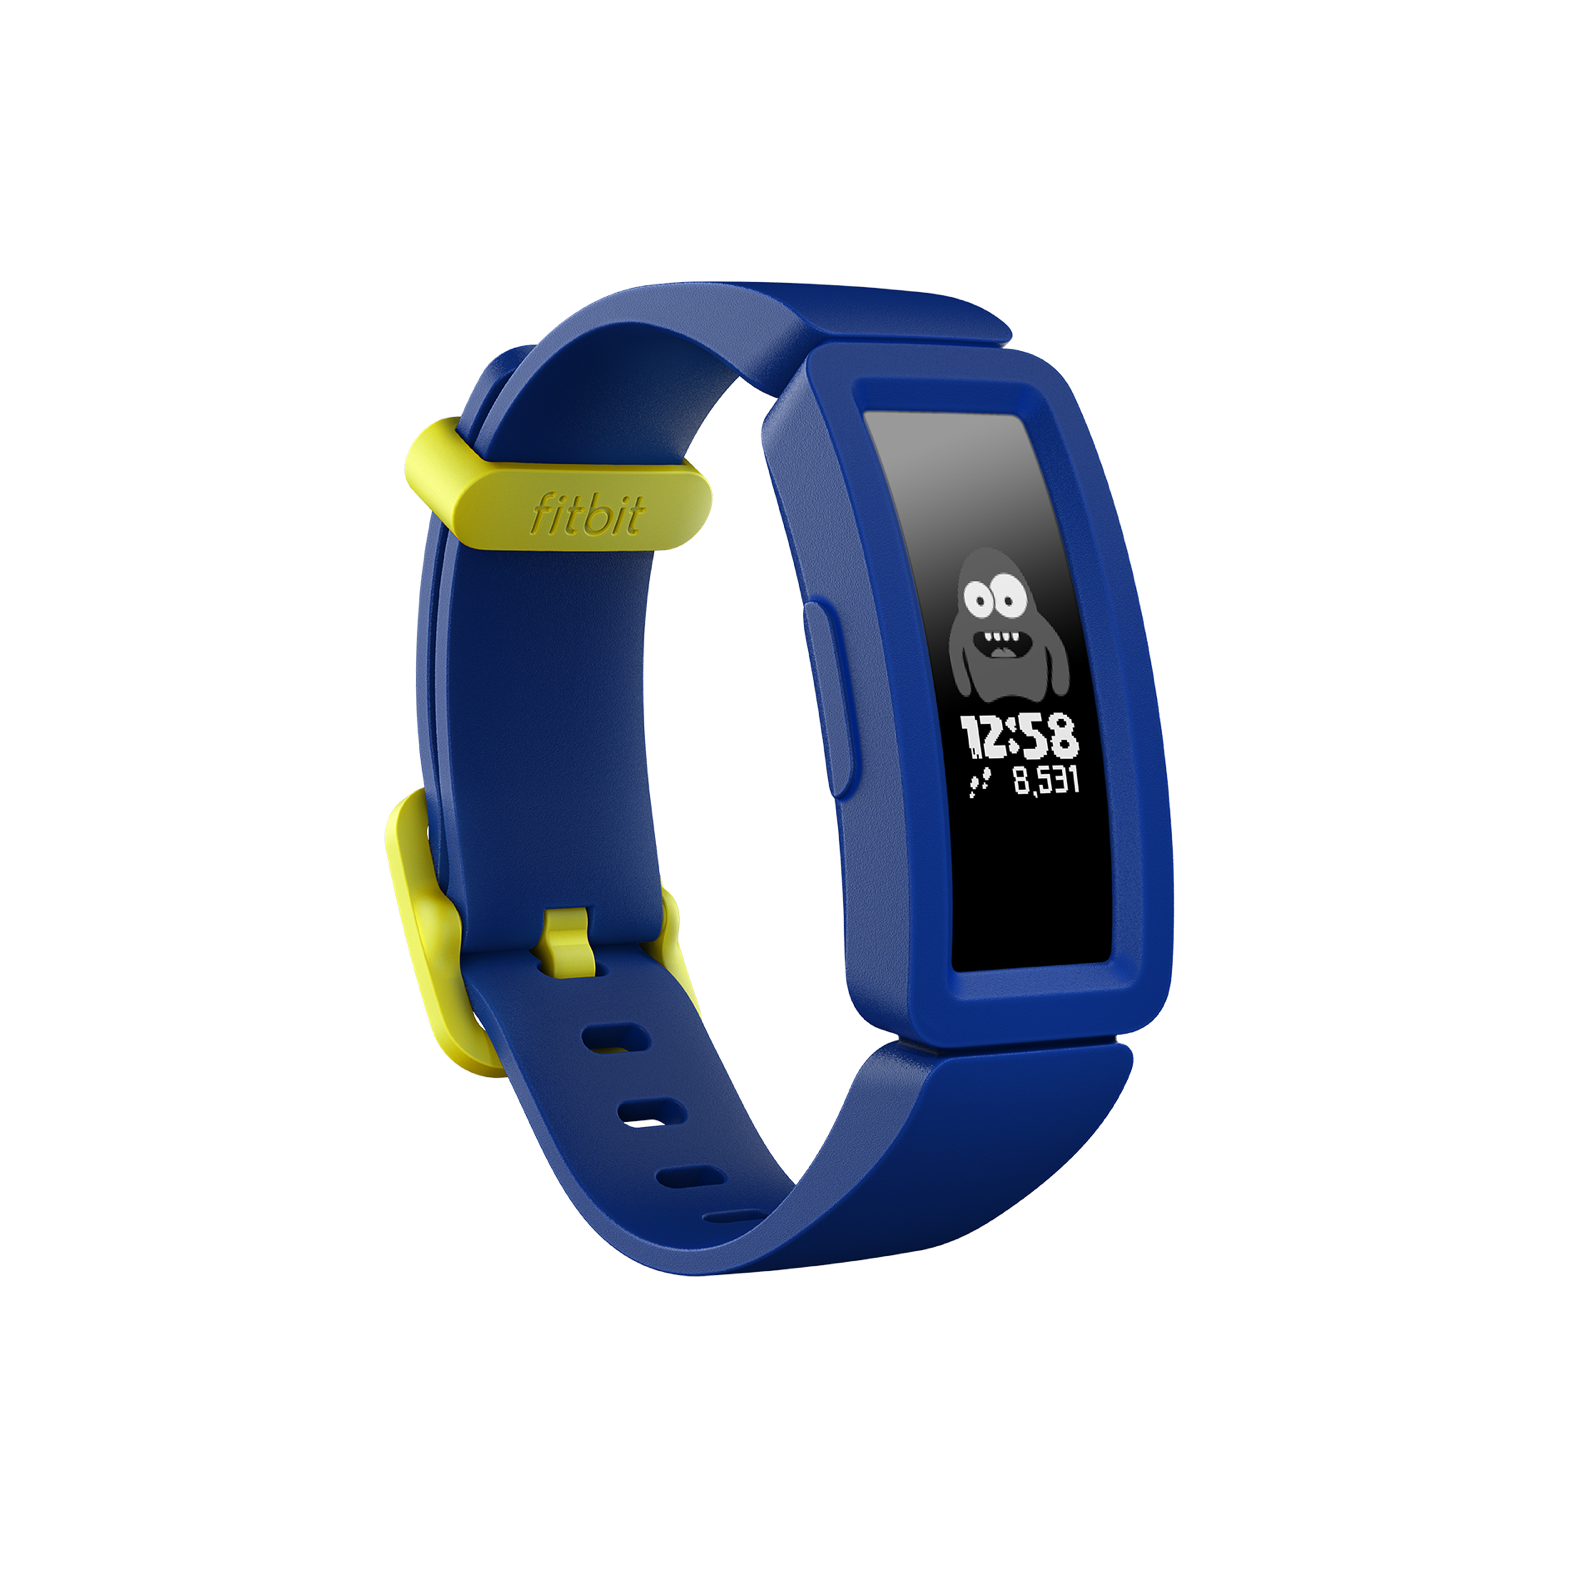 Fitbit Ace 2™ Activity Tracker for 